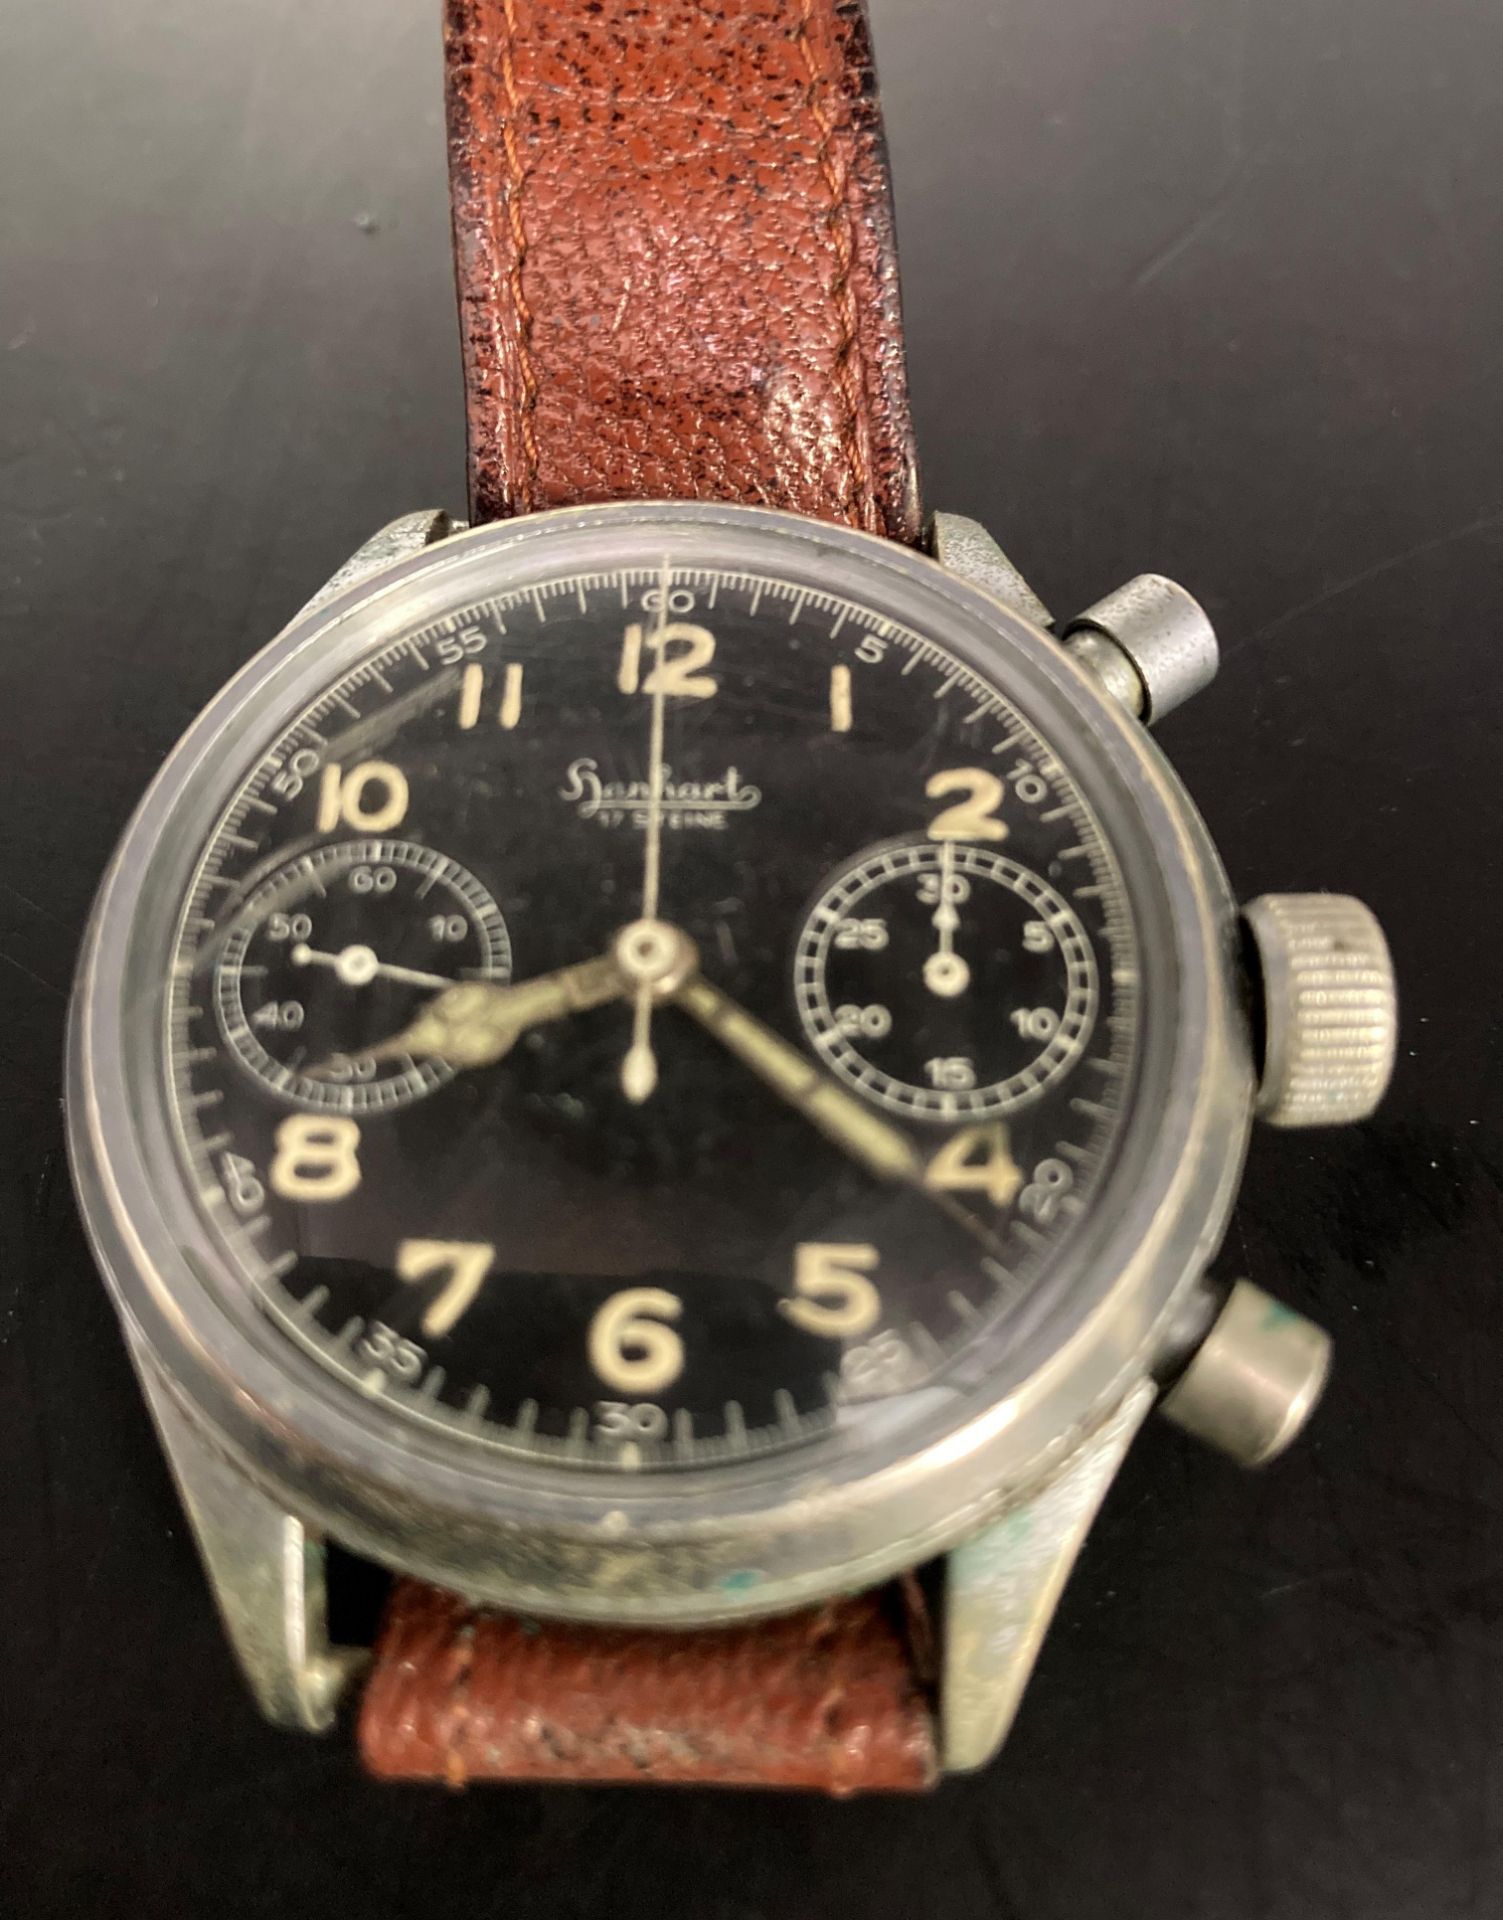 A Hanharts World War II Luftwaffe pilots chronograph with black face and brown leather strap - Image 4 of 10